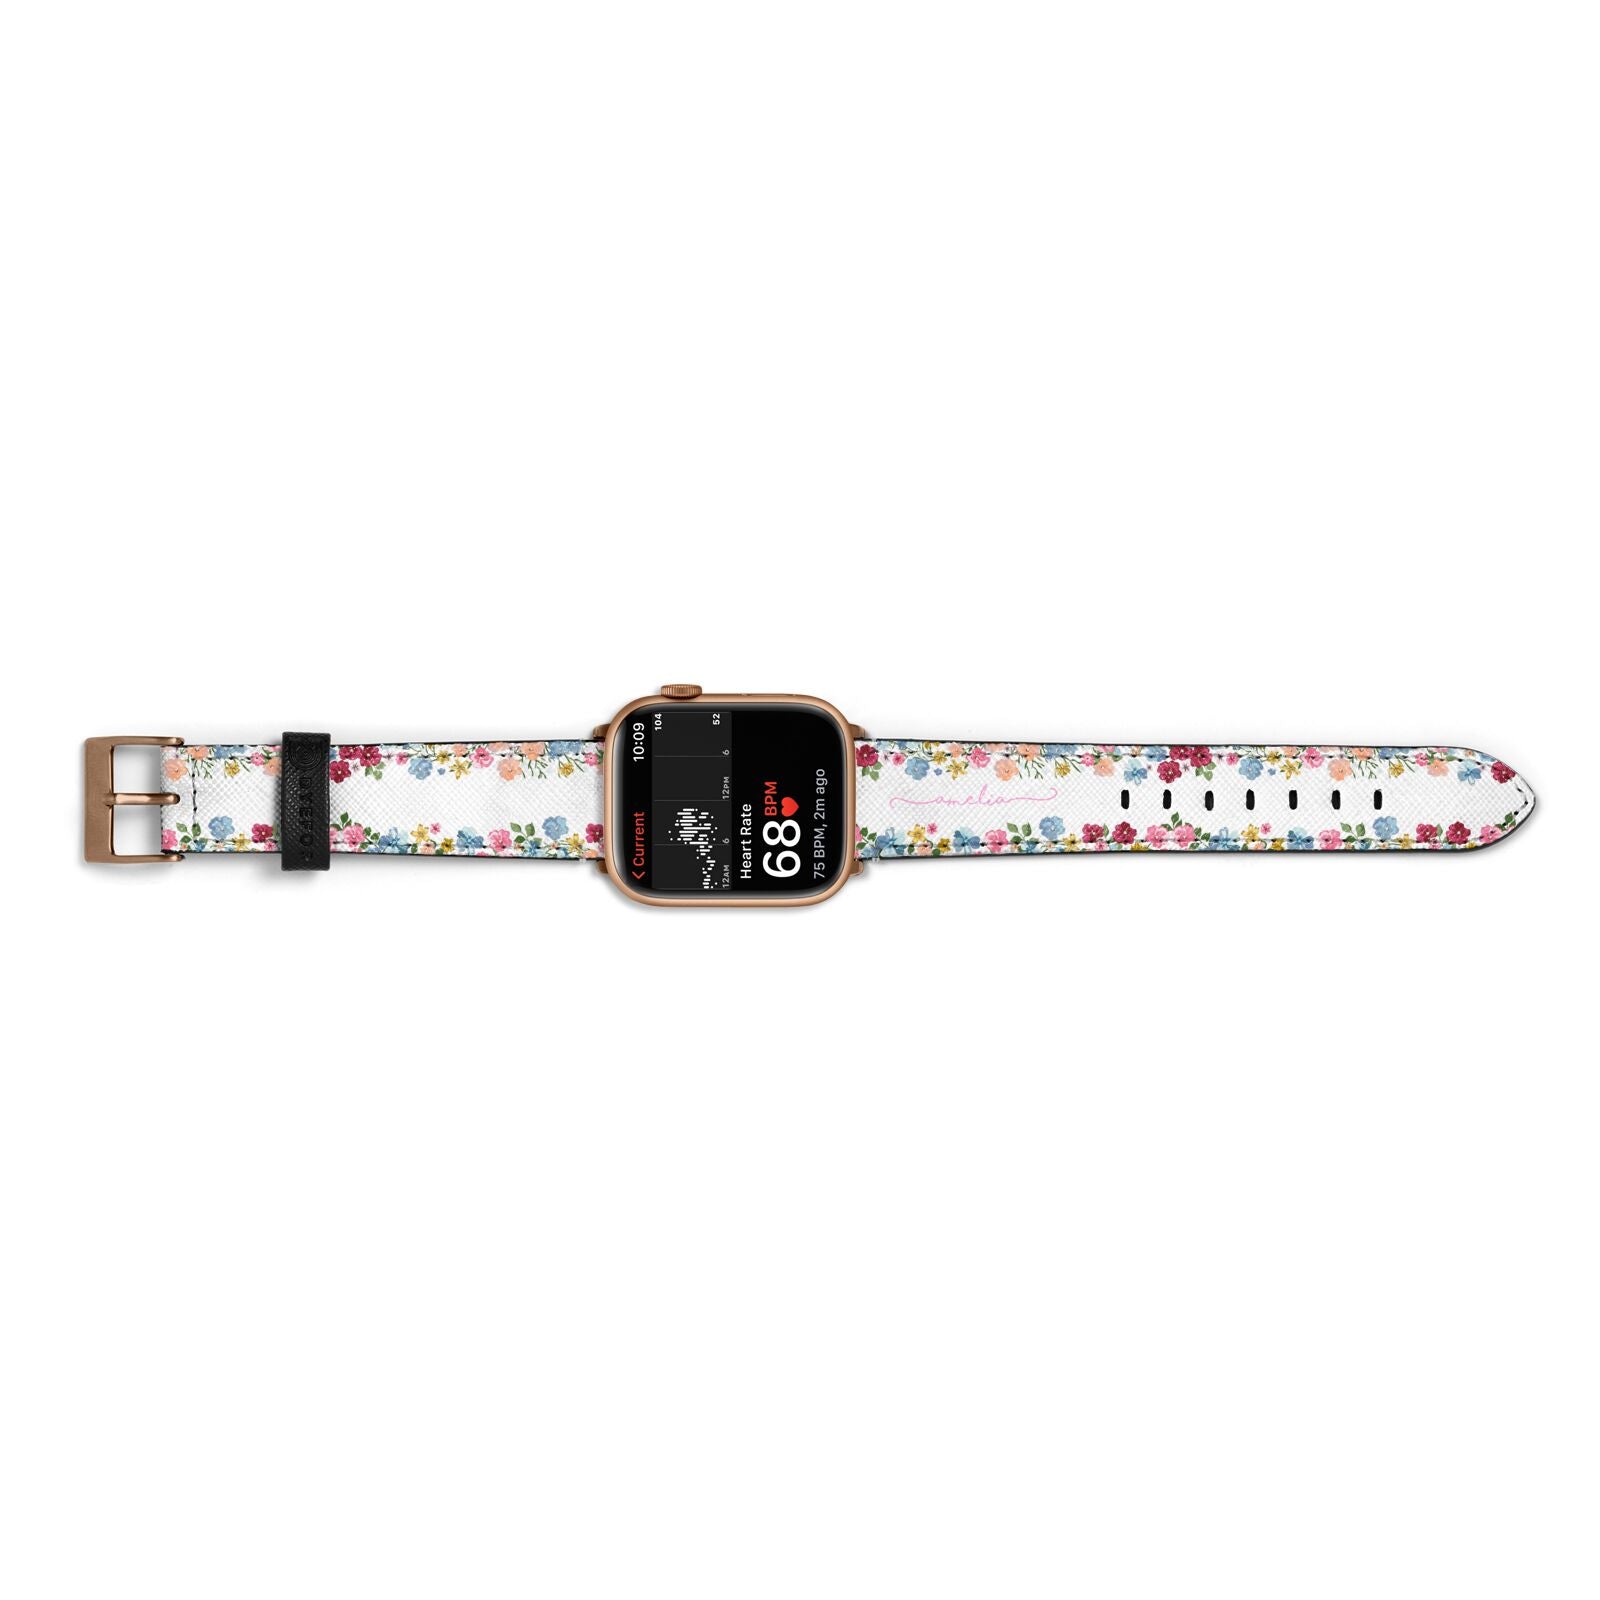 Personalised Floral Meadow Apple Watch Strap Size 38mm Landscape Image Gold Hardware